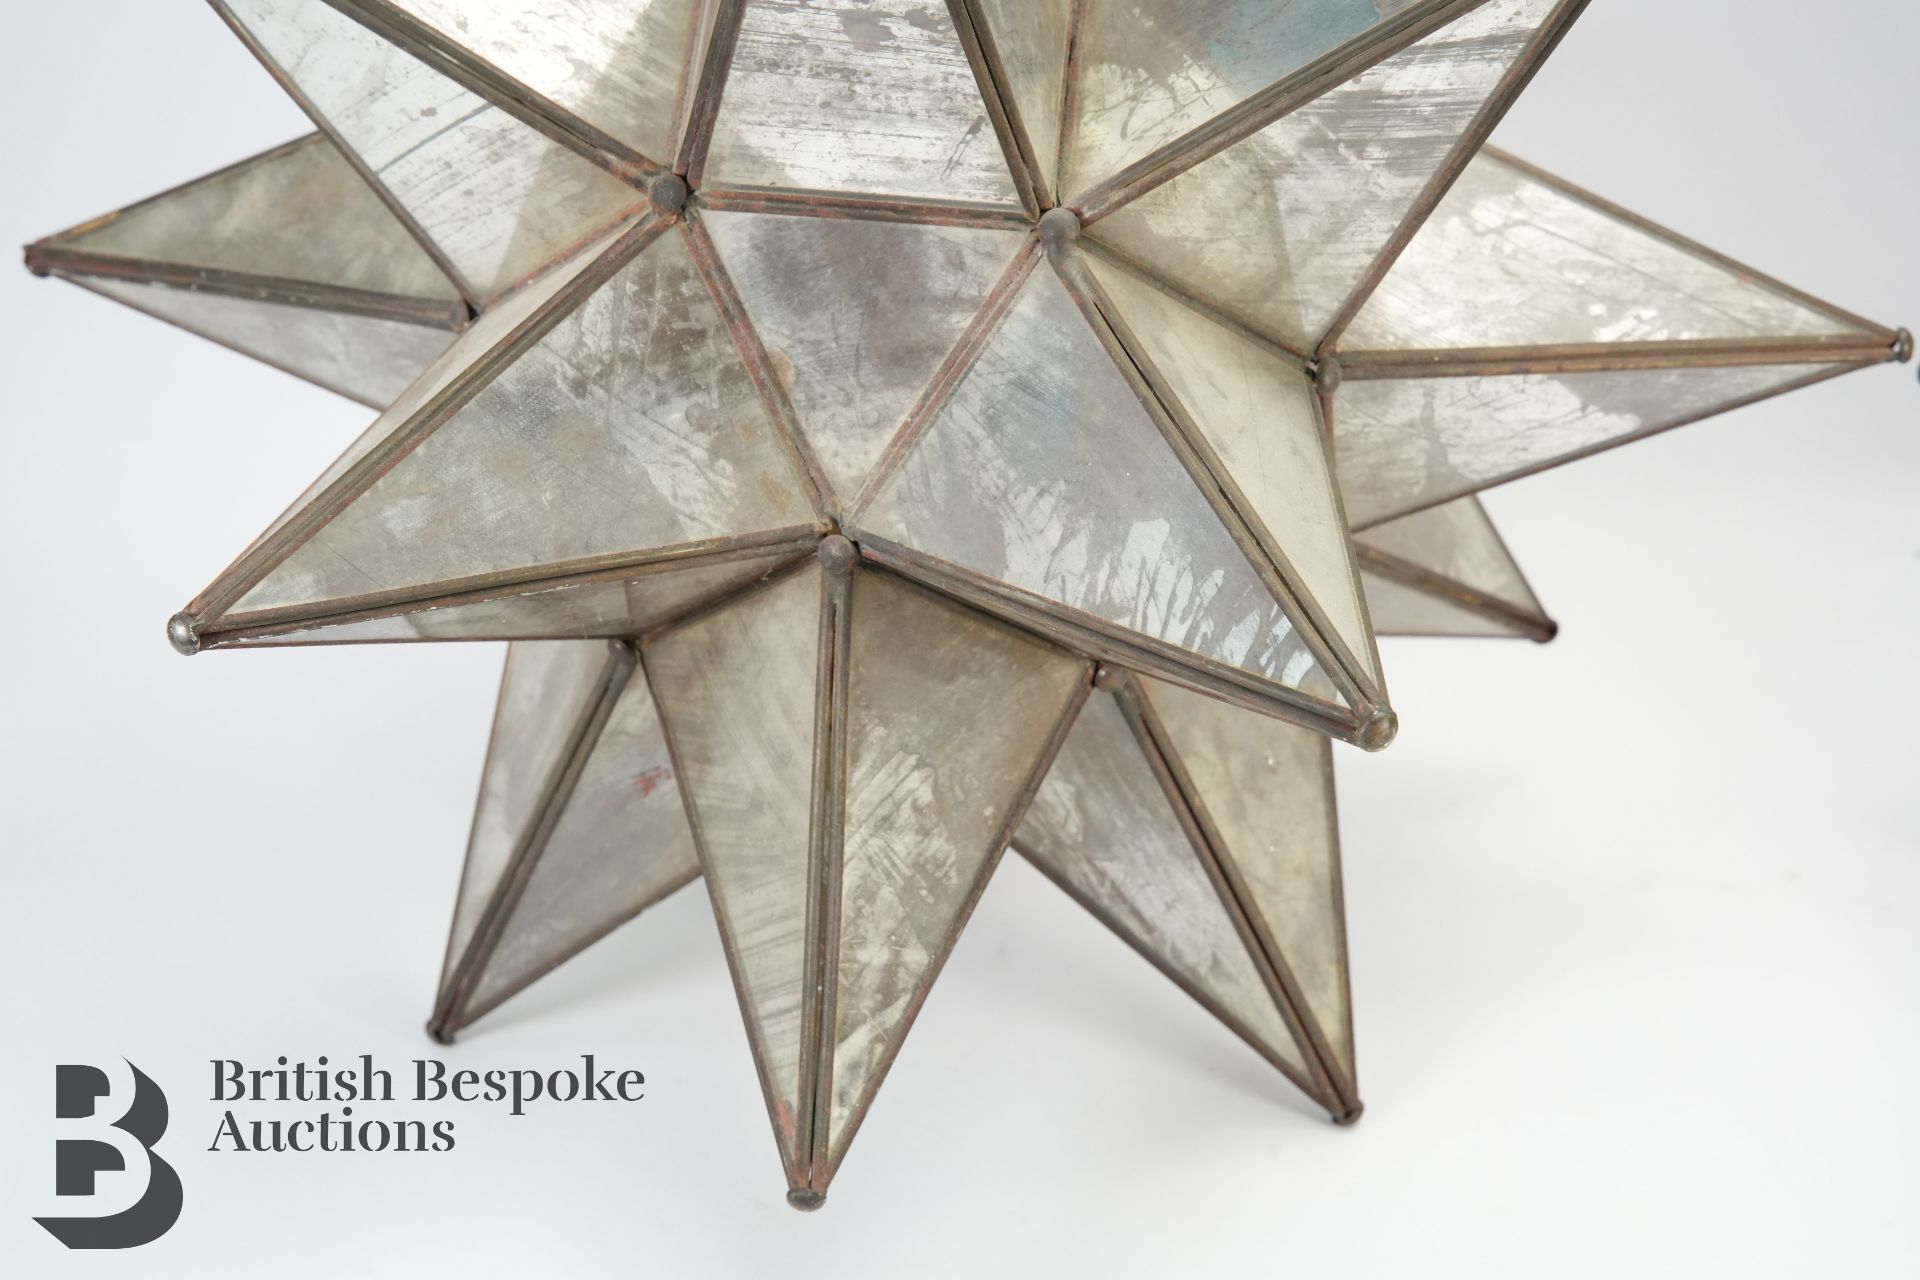 Two Mexican Frosted Glass Star Pendant Lamp Shades - Image 2 of 4